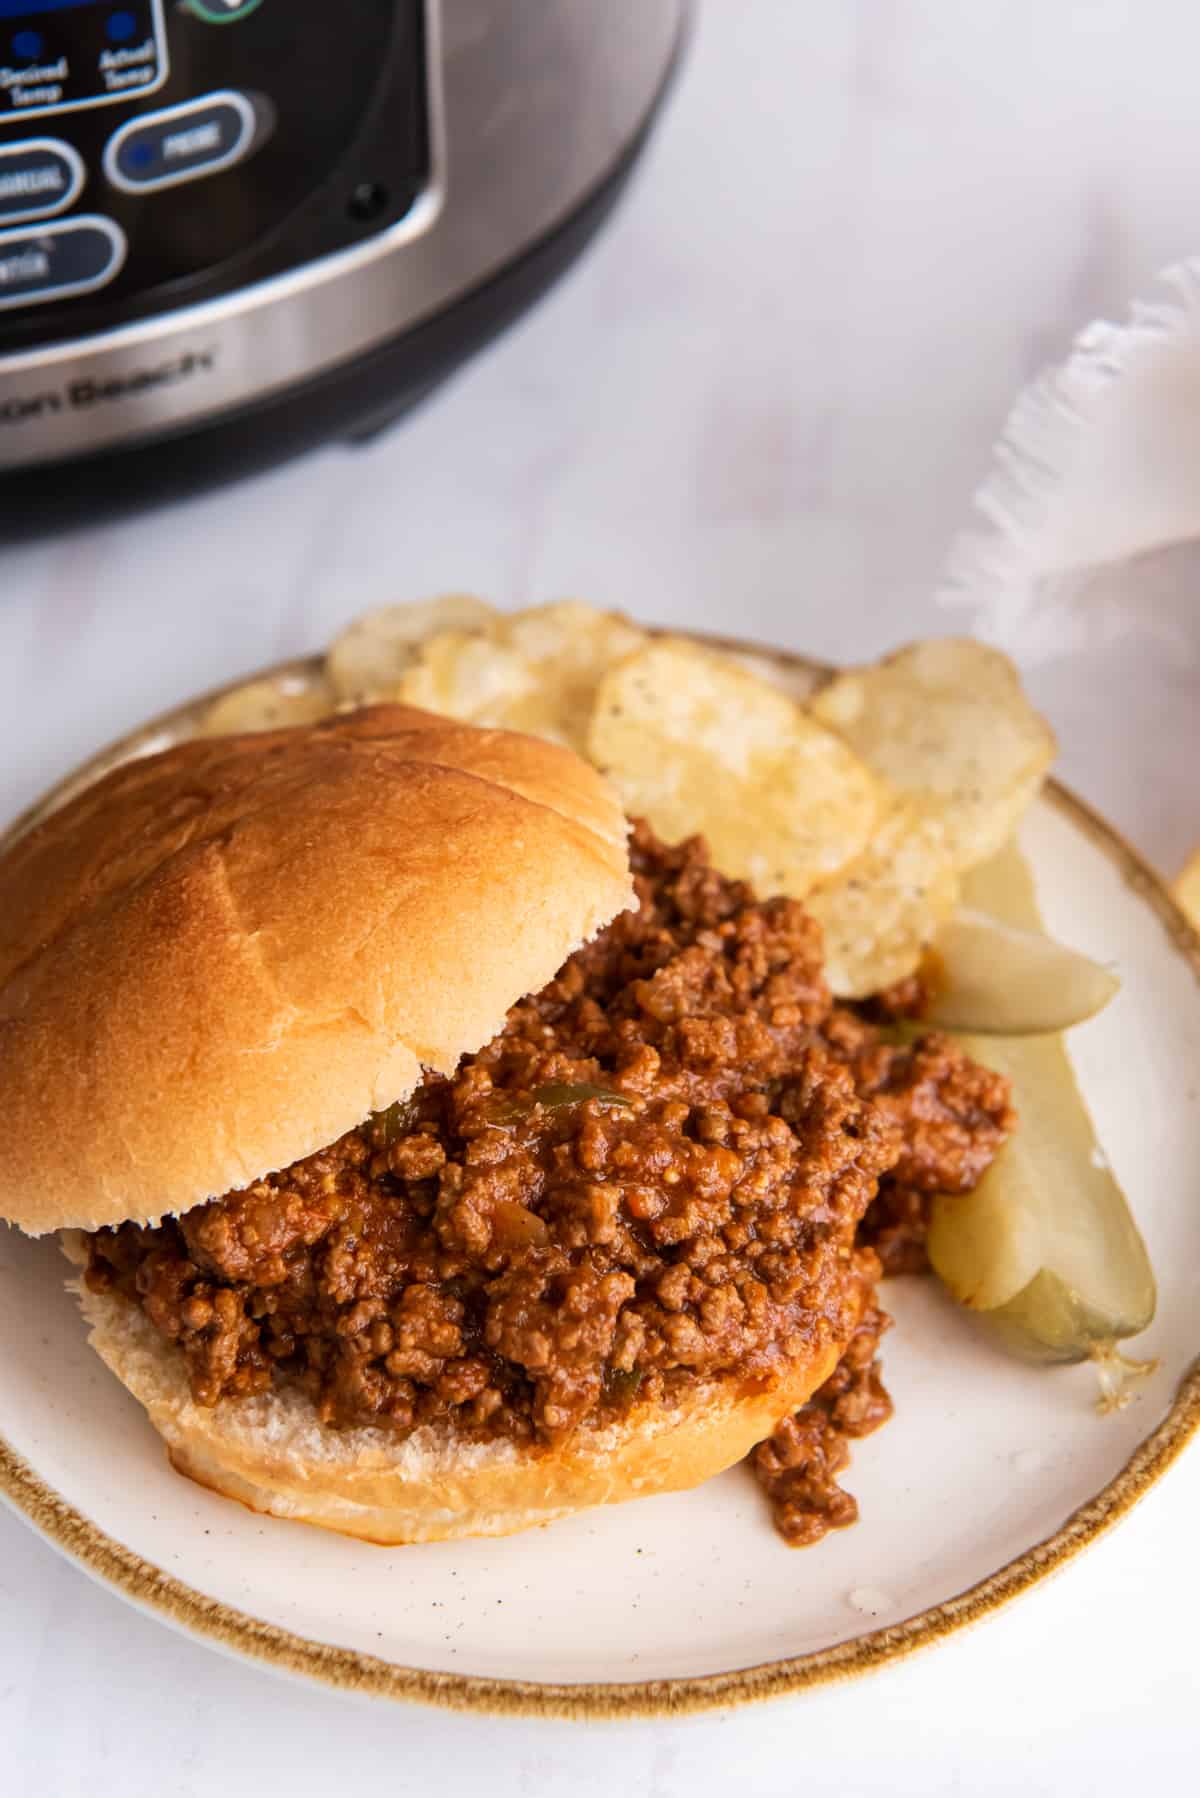 slow cooker sloppy joe meat on a hamburger bun on a plate with chips and a pickle.